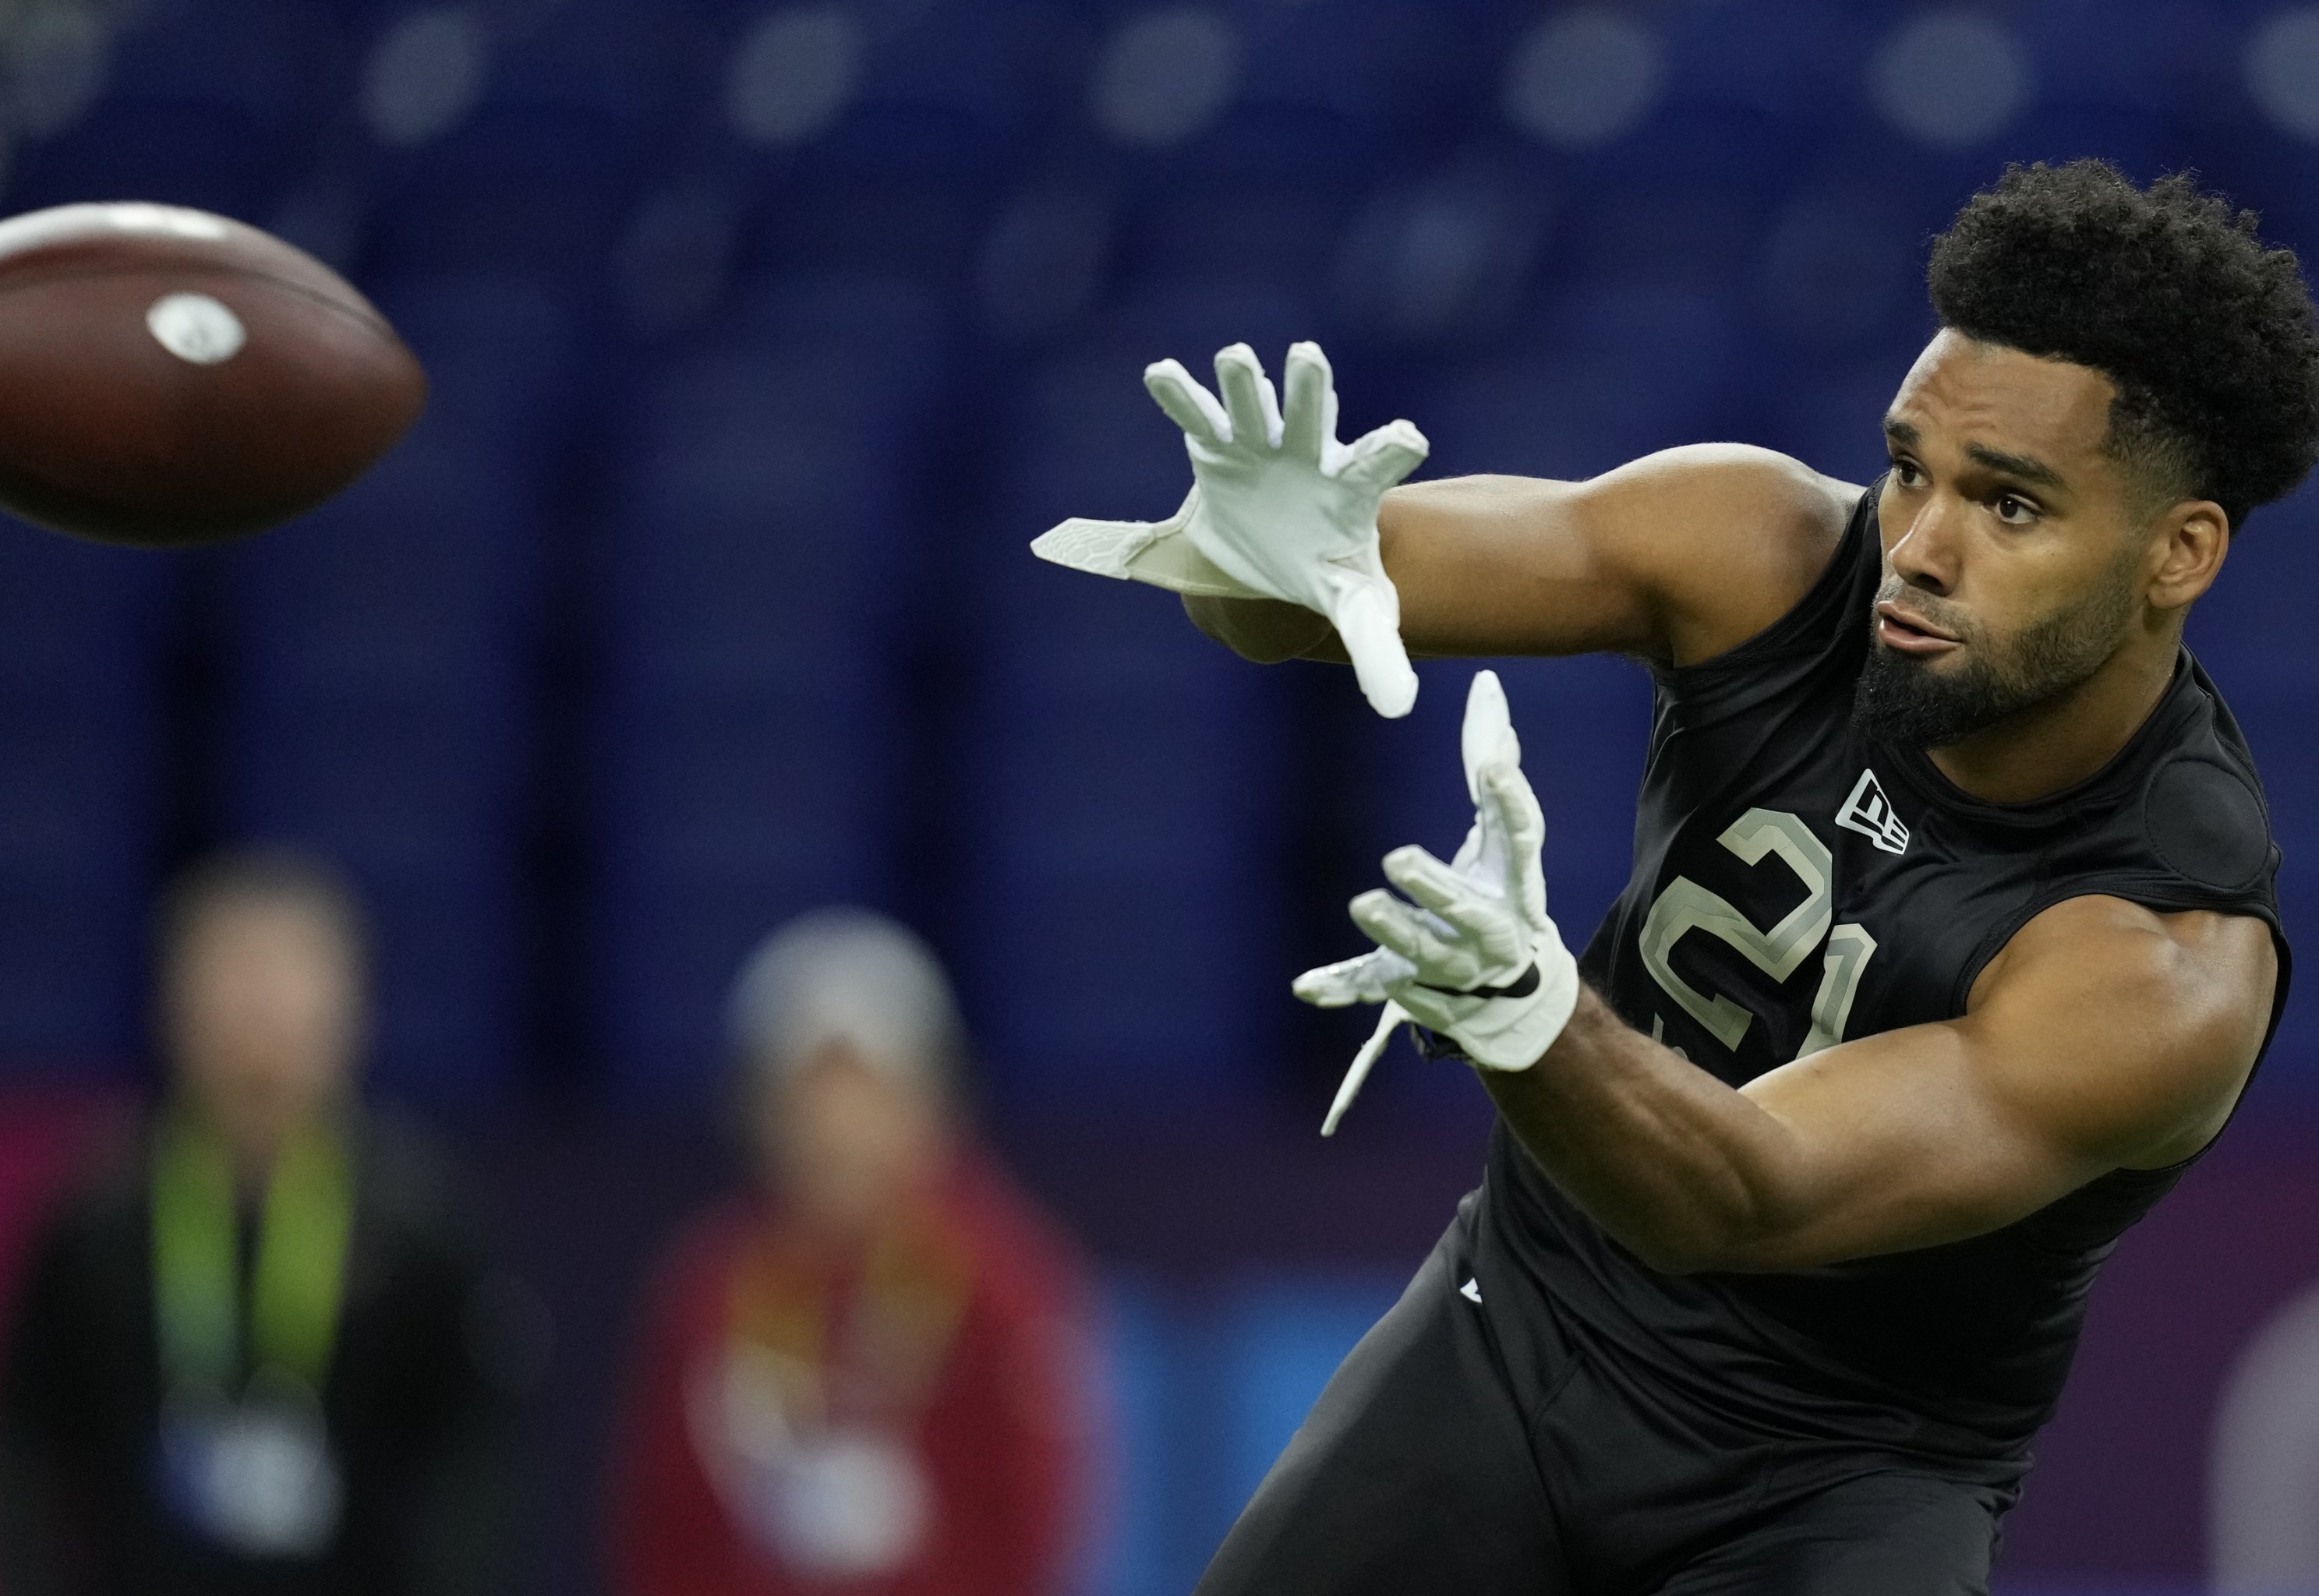 NFL Combine 2022: 3 players who improved their draft stock on Day 1